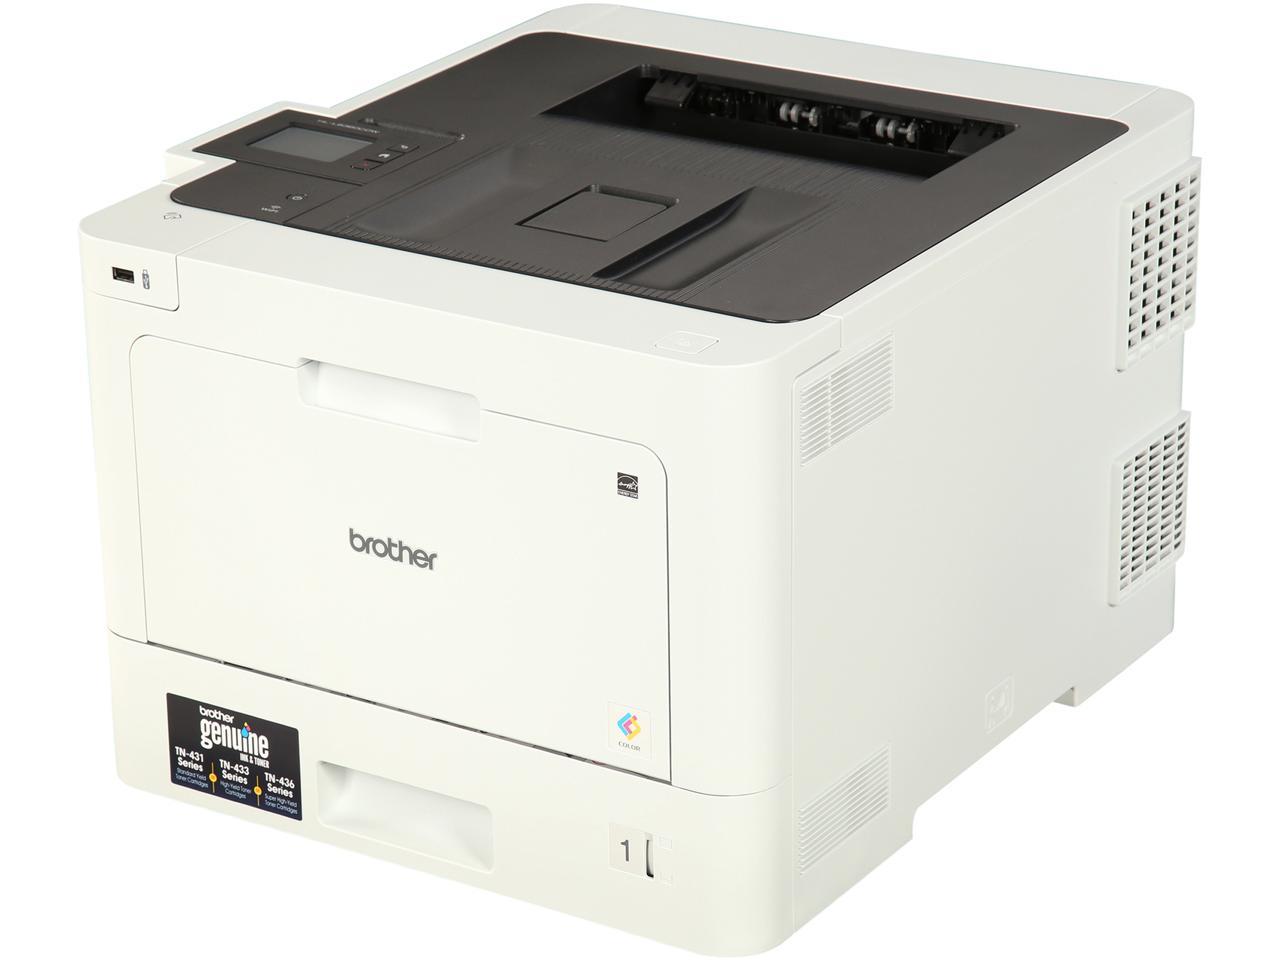 Brother Hl L8360cdw Business Wireless Color Laser Printer With Automatic Duplex Printing Mobile 3168